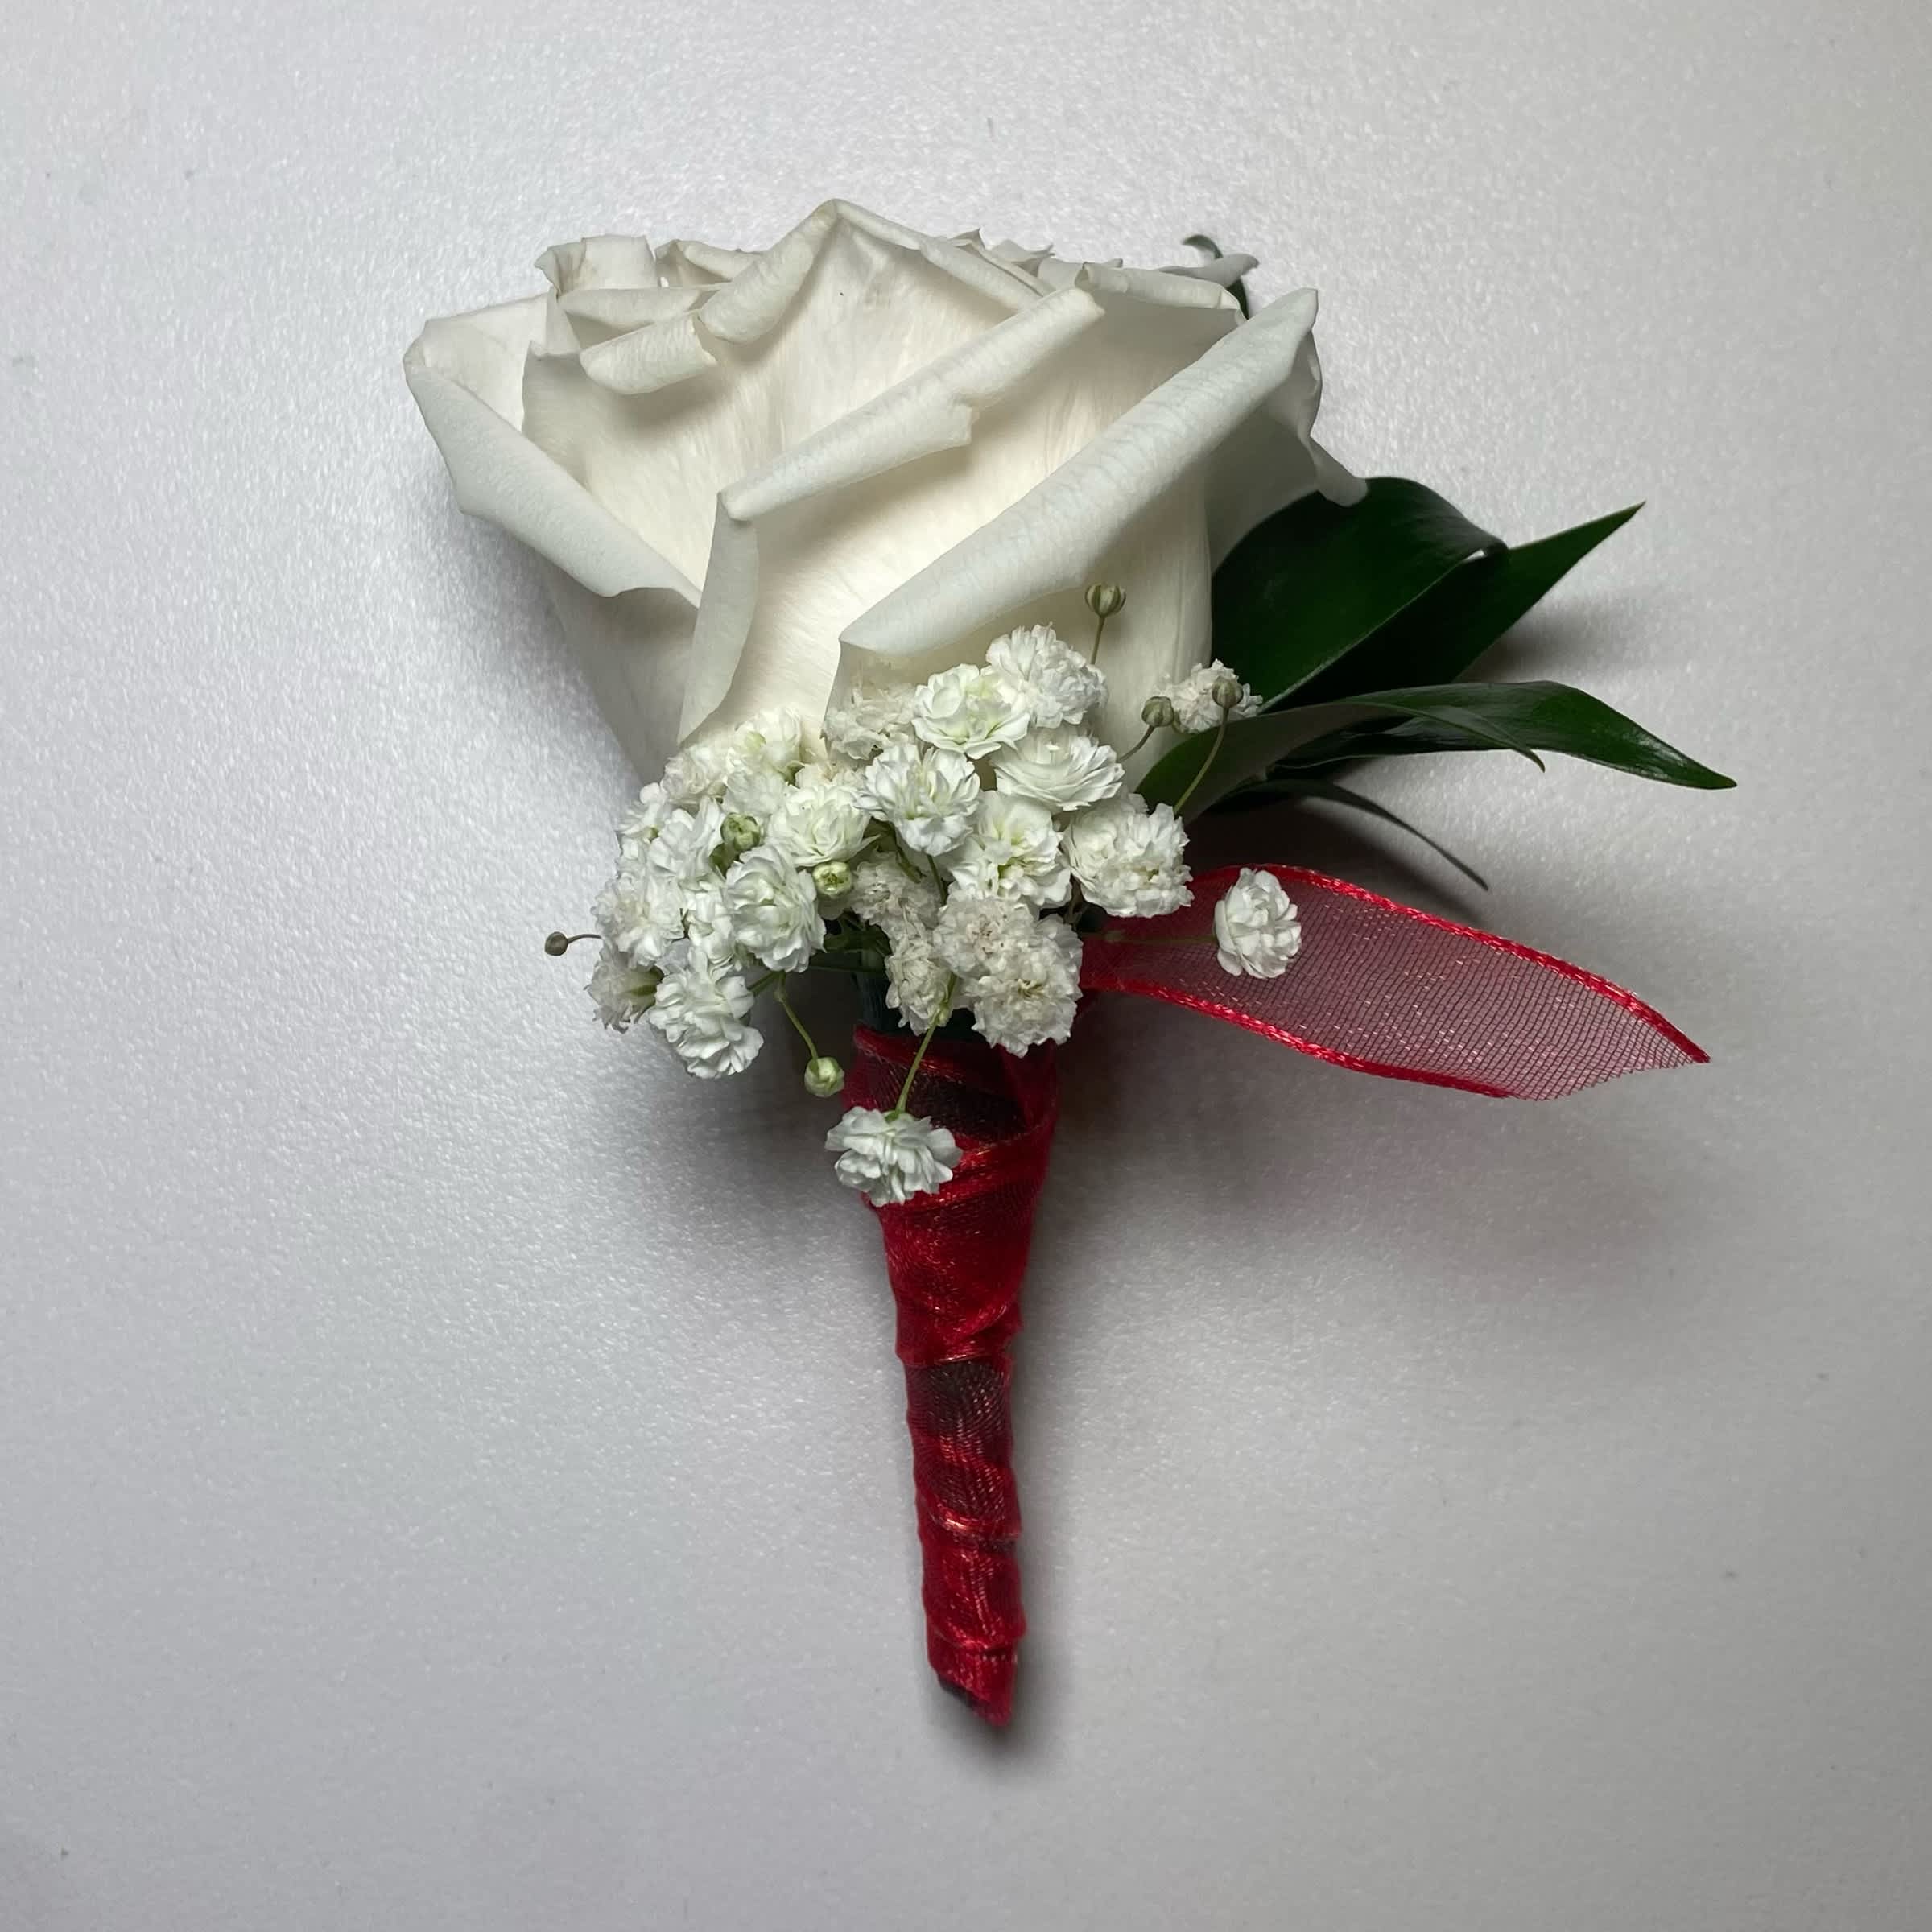 Red/ White Rose Boutonniere - This White Rose Boutonniere Includes, Red Chiffon Ribbon, White Rose, Babies Breath, and Gentle Greenery. Or as Similar as Possible.